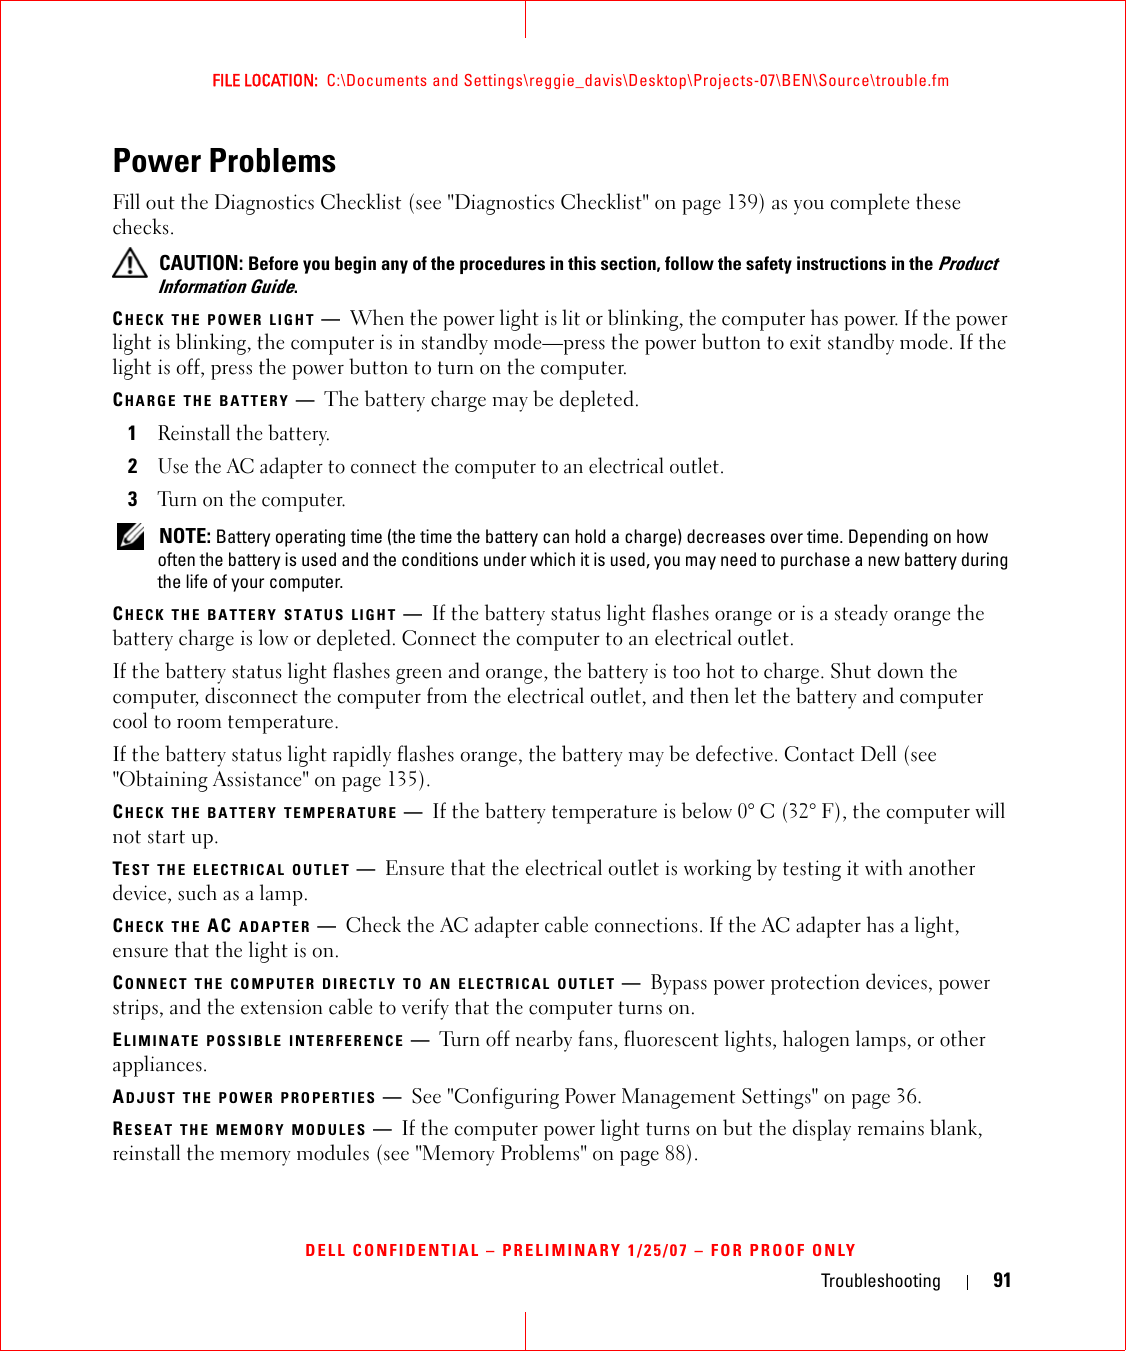 Troubleshooting 91FILE LOCATION:  C:\Documents and Settings\reggie_davis\Desktop\Projects-07\BEN\Source\trouble.fmDELL CONFIDENTIAL – PRELIMINARY 1/25/07 – FOR PROOF ONLYPower ProblemsFill out the Diagnostics Checklist (see &quot;Diagnostics Checklist&quot; on page 139) as you complete these checks. CAUTION: Before you begin any of the procedures in this section, follow the safety instructions in the Product Information Guide.CHECK THE POWER LIGHT —When the power light is lit or blinking, the computer has power. If the power light is blinking, the computer is in standby mode—press the power button to exit standby mode. If the light is off, press the power button to turn on the computer.CHARGE THE BATTERY —The battery charge may be depleted.1Reinstall the battery.2Use the AC adapter to connect the computer to an electrical outlet.3Turn on the computer. NOTE: Battery operating time (the time the battery can hold a charge) decreases over time. Depending on how often the battery is used and the conditions under which it is used, you may need to purchase a new battery during the life of your computer.CHECK THE BATTERY STATUS LIGHT —If the battery status light flashes orange or is a steady orange the battery charge is low or depleted. Connect the computer to an electrical outlet.If the battery status light flashes green and orange, the battery is too hot to charge. Shut down the computer, disconnect the computer from the electrical outlet, and then let the battery and computer cool to room temperature.If the battery status light rapidly flashes orange, the battery may be defective. Contact Dell (see &quot;Obtaining Assistance&quot; on page 135).CHECK THE BATTERY TEMPERATURE —If the battery temperature is below 0° C (32° F), the computer will not start up.TEST THE ELECTRICAL OUTLET —Ensure that the electrical outlet is working by testing it with another device, such as a lamp.CHECK THE AC ADAPTER —Check the AC adapter cable connections. If the AC adapter has a light, ensure that the light is on.CONNECT THE COMPUTER DIRECTLY TO AN ELECTRICAL OUTLET —Bypass power protection devices, power strips, and the extension cable to verify that the computer turns on.ELIMINATE POSSIBLE INTERFERENCE —Turn off nearby fans, fluorescent lights, halogen lamps, or other appliances.ADJUST THE POWER PROPERTIES —See &quot;Configuring Power Management Settings&quot; on page 36.RESEAT THE MEMORY MODULES —If the computer power light turns on but the display remains blank, reinstall the memory modules (see &quot;Memory Problems&quot; on page 88).